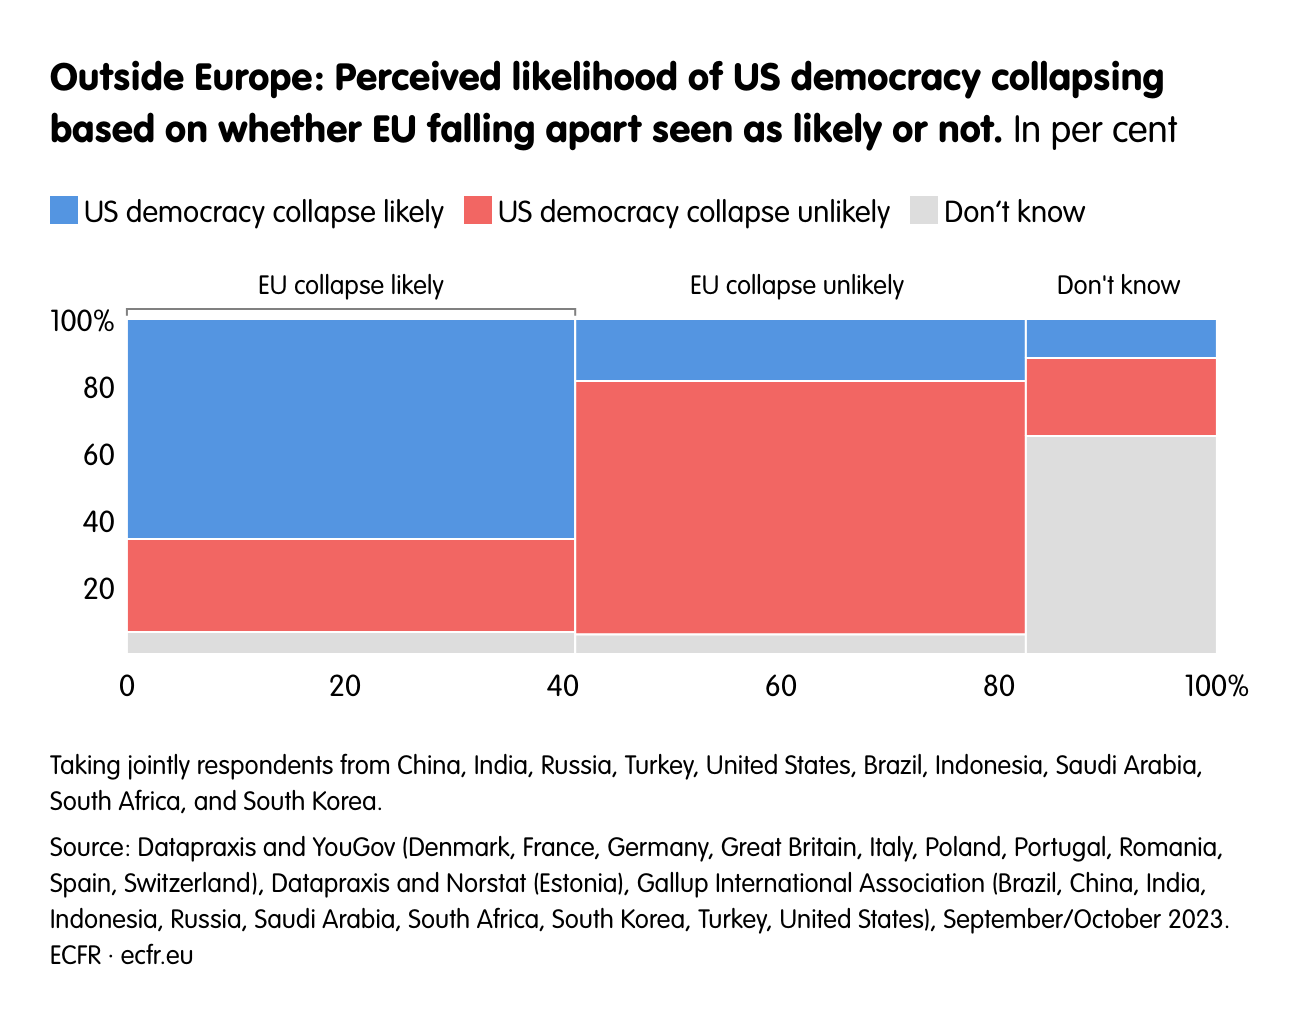 Outside Europe: Perceived likelihood of US democracy collapsing based on whether EU falling apart seen as likely or not.